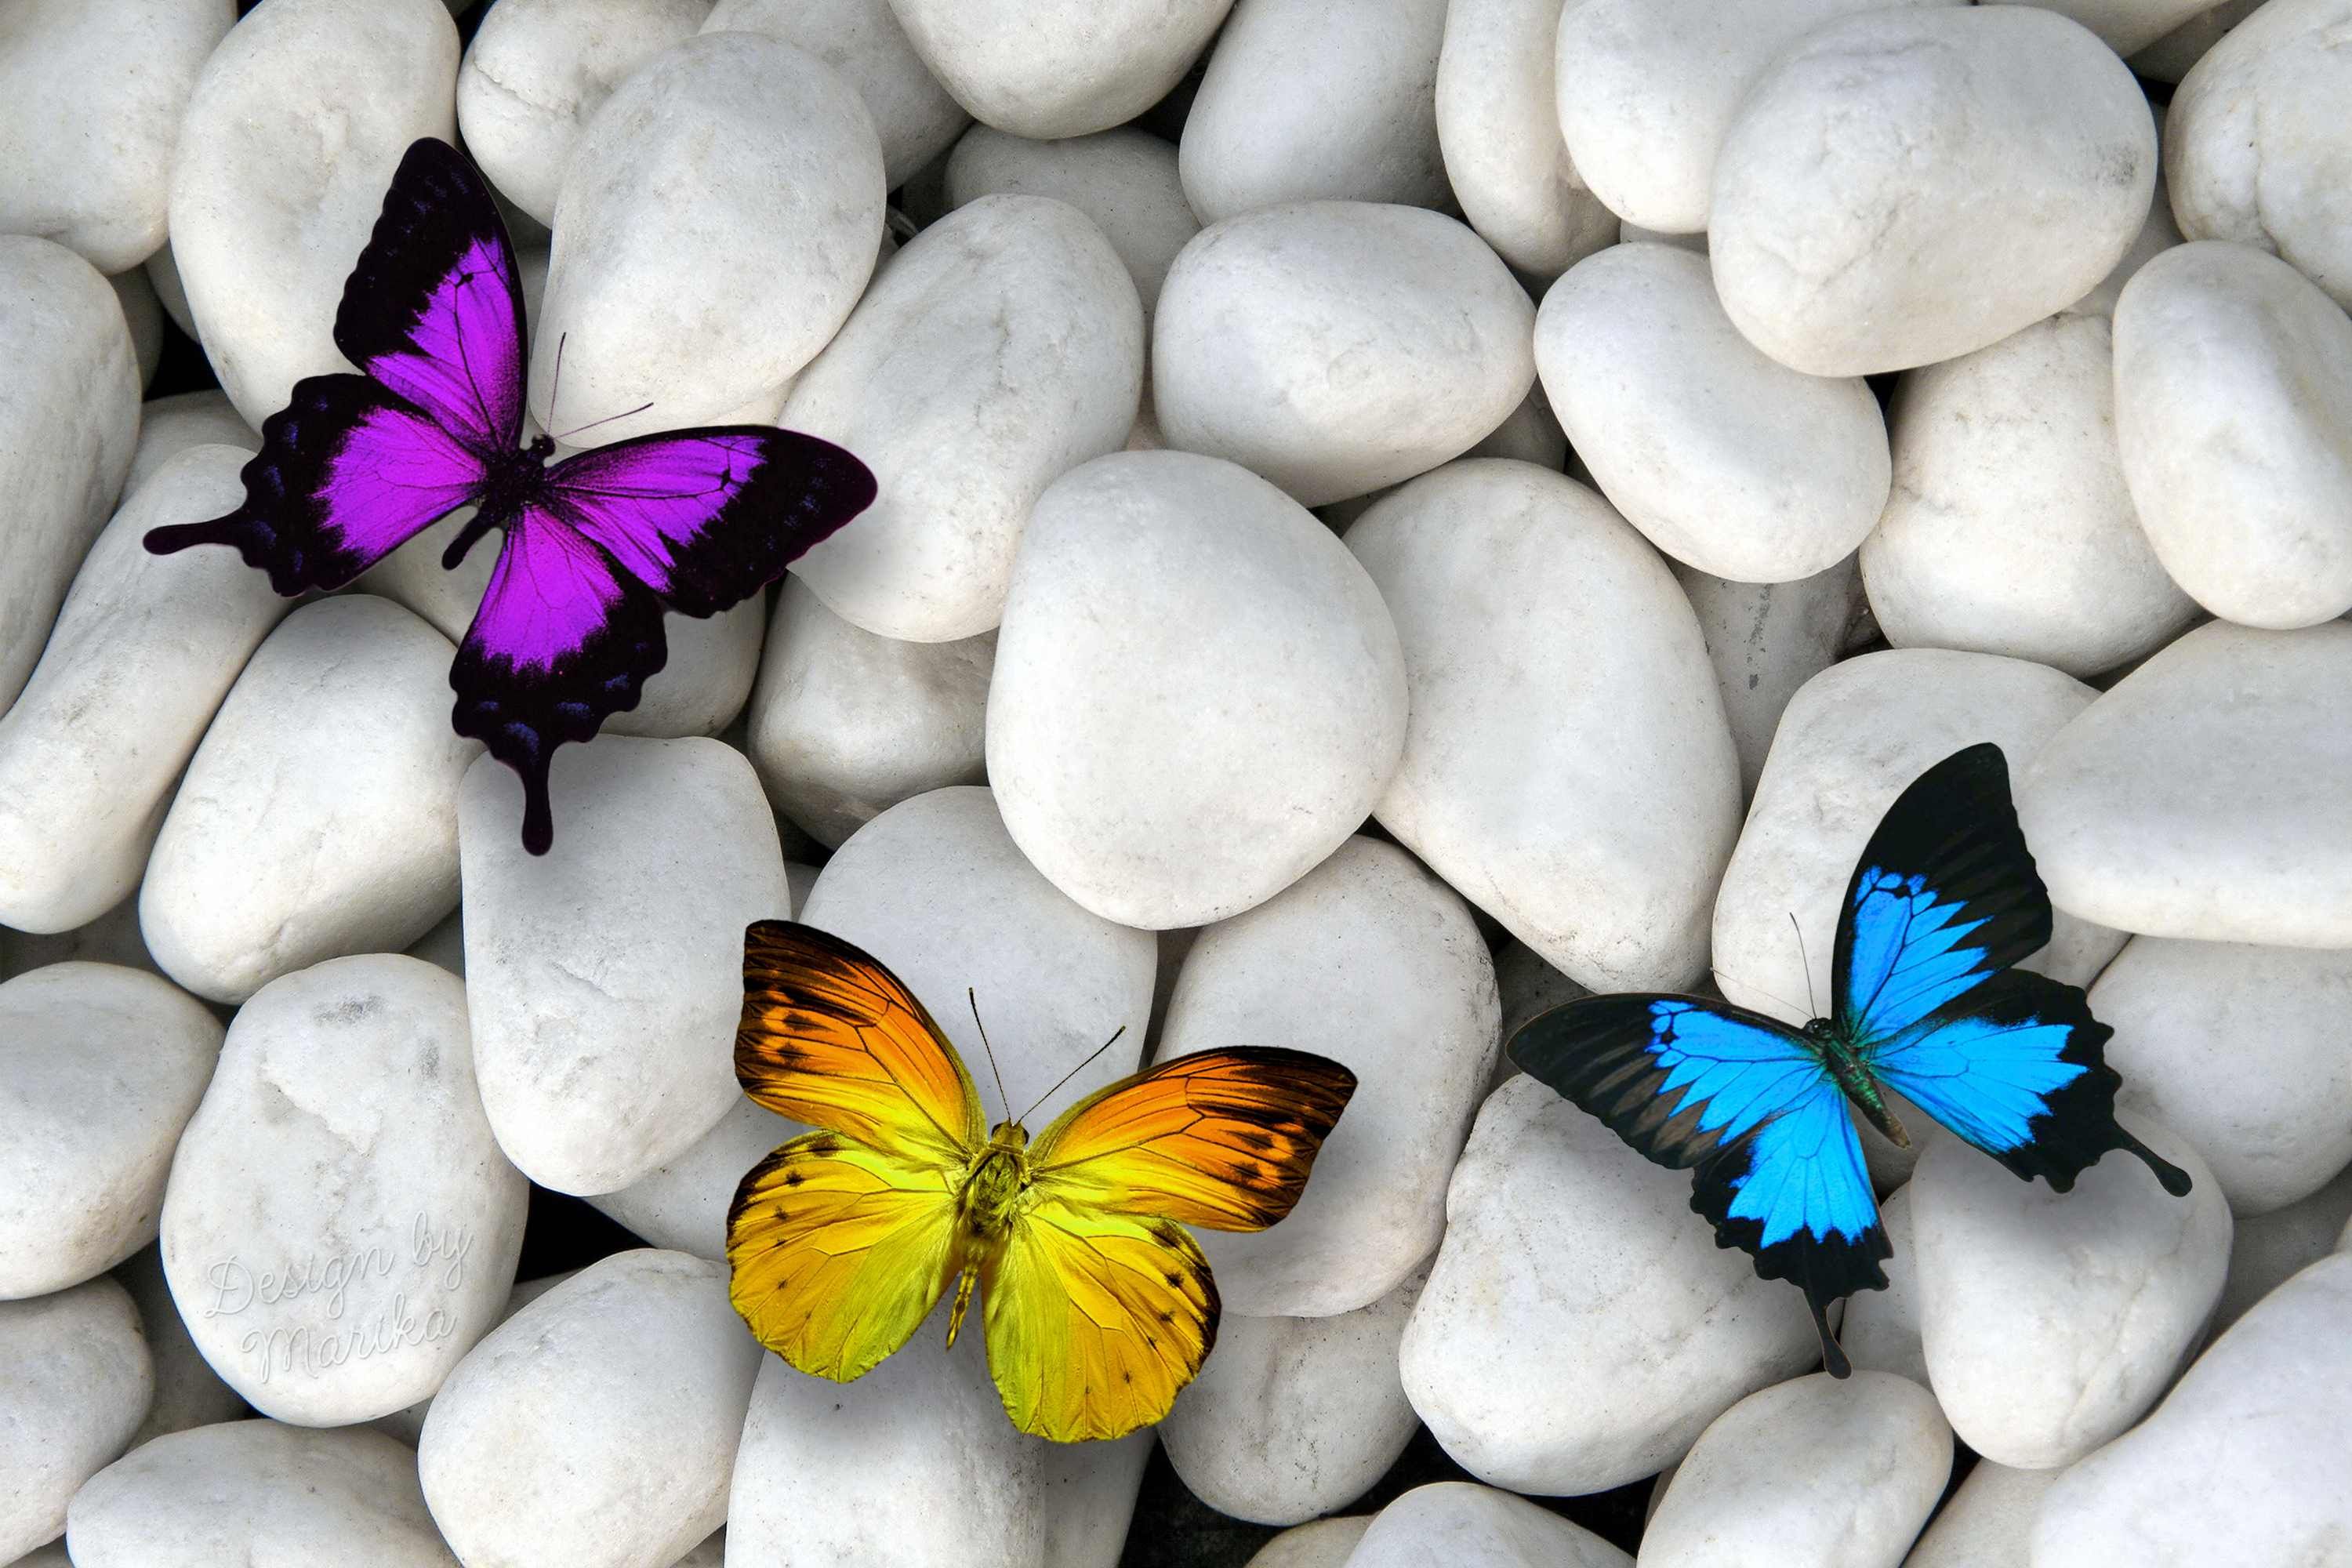 mariposas wallpaper,butterfly,insect,moths and butterflies,pebble,invertebrate